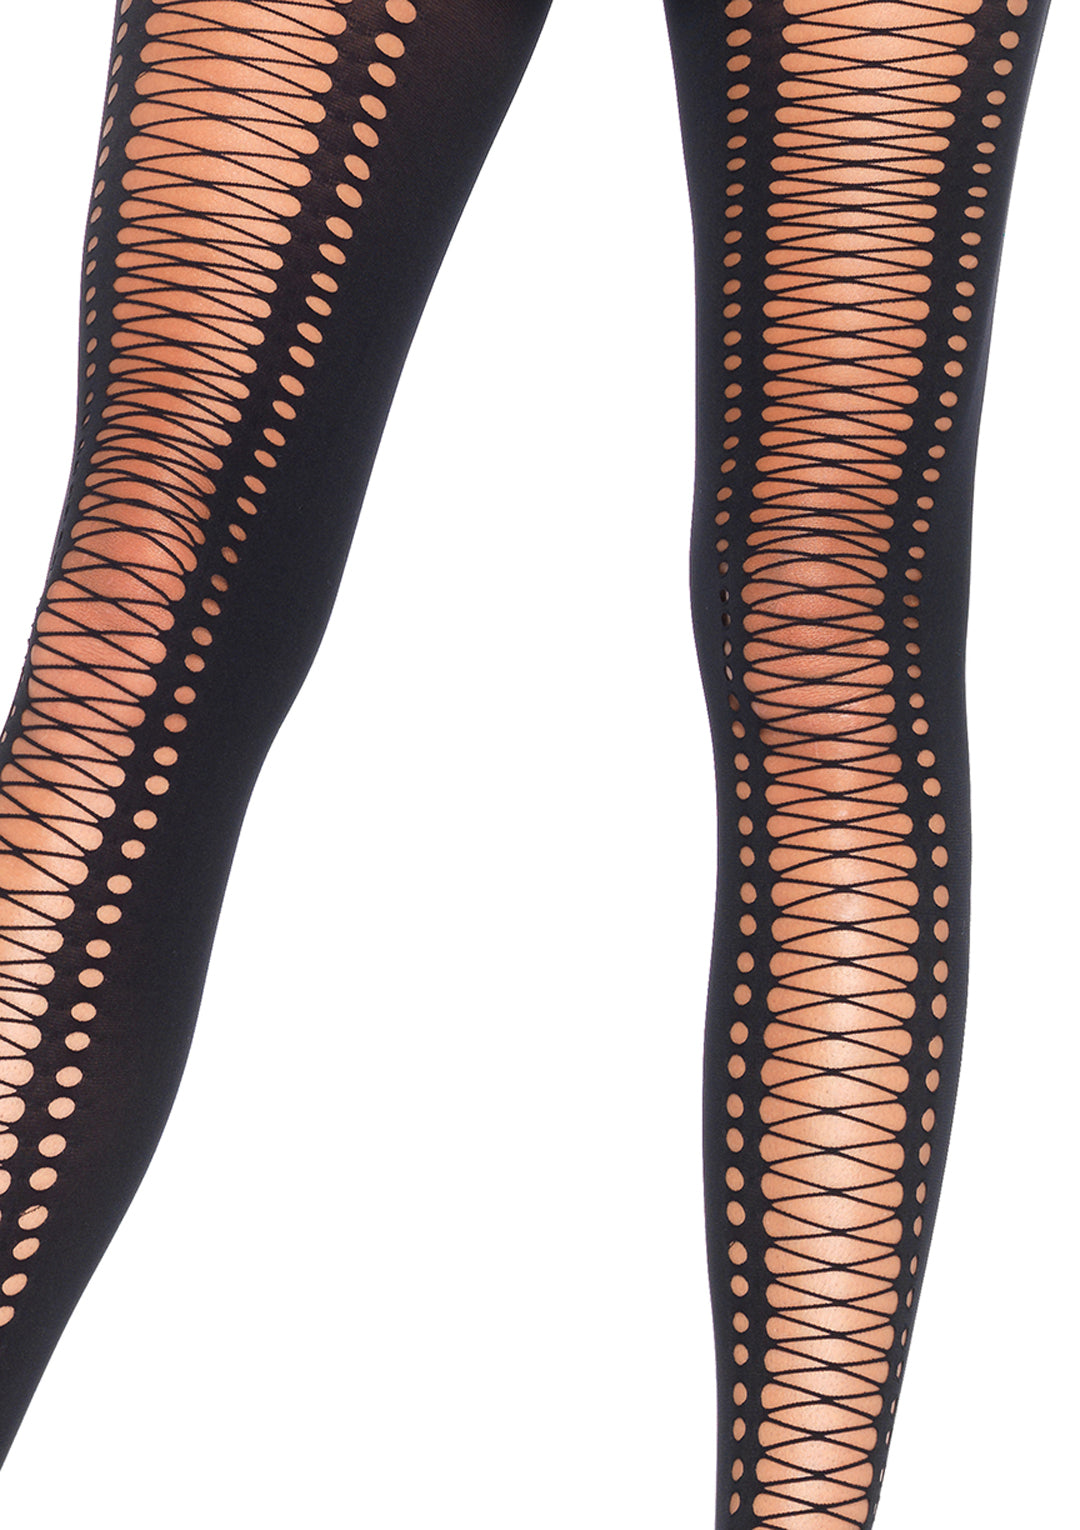 Spandex Seamless Opaque Crochet Faux Lace Up Tights